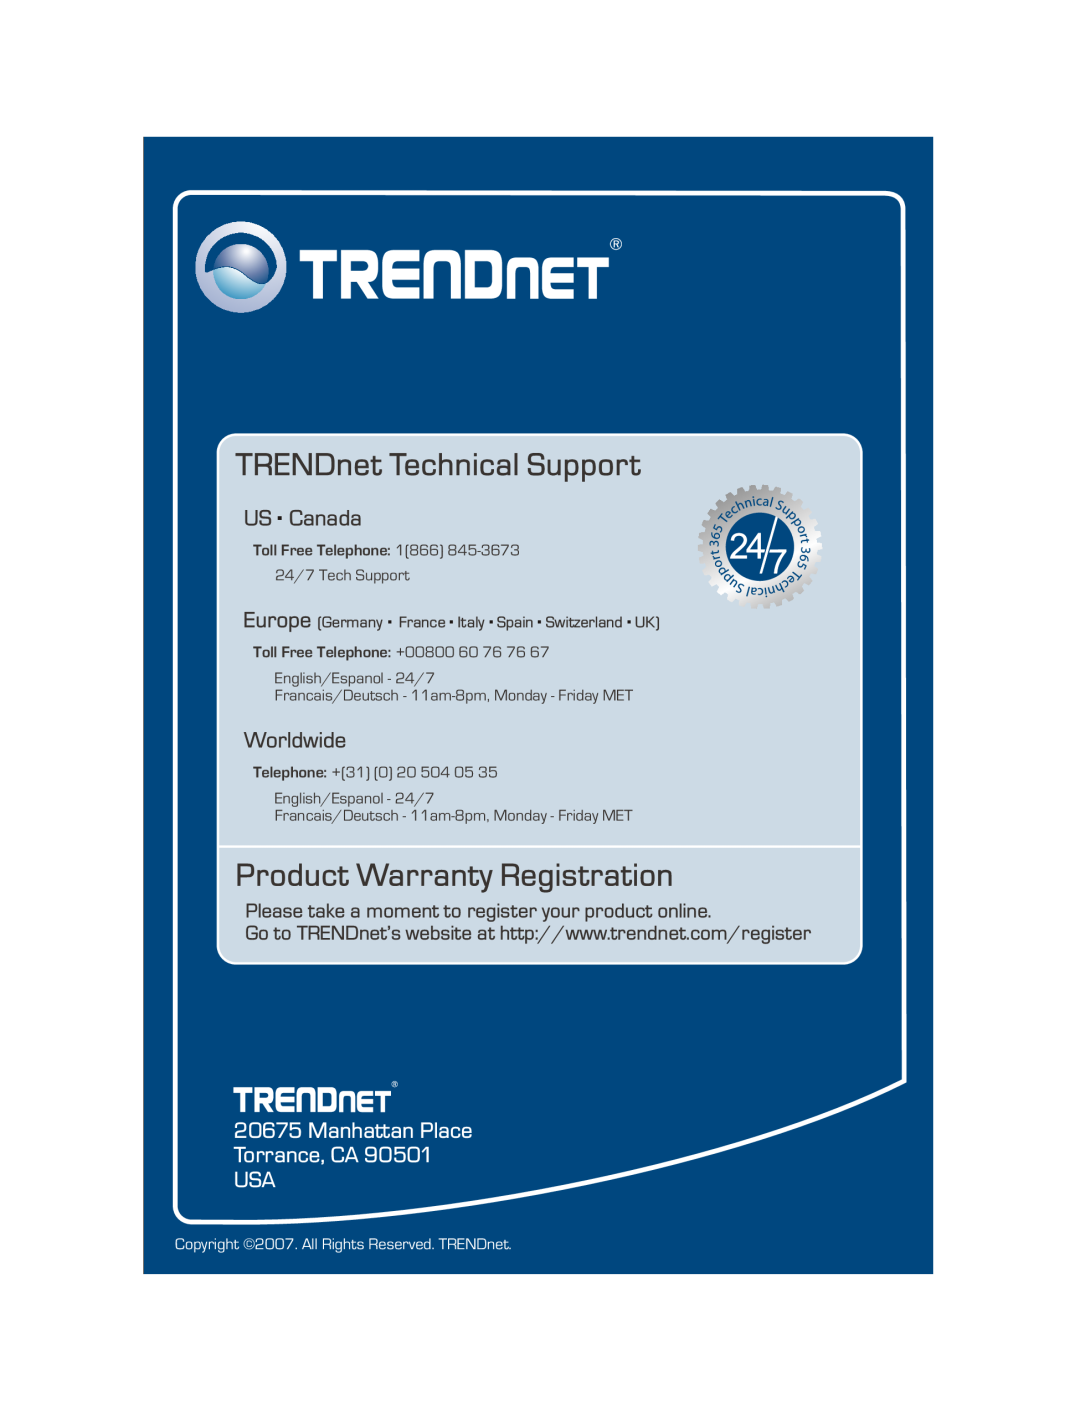 TRENDnet TEWAO12O Manhattan Place Torrance, CA USA, TRENDnet Technical Support, Product Warranty Registration, US . Canada 